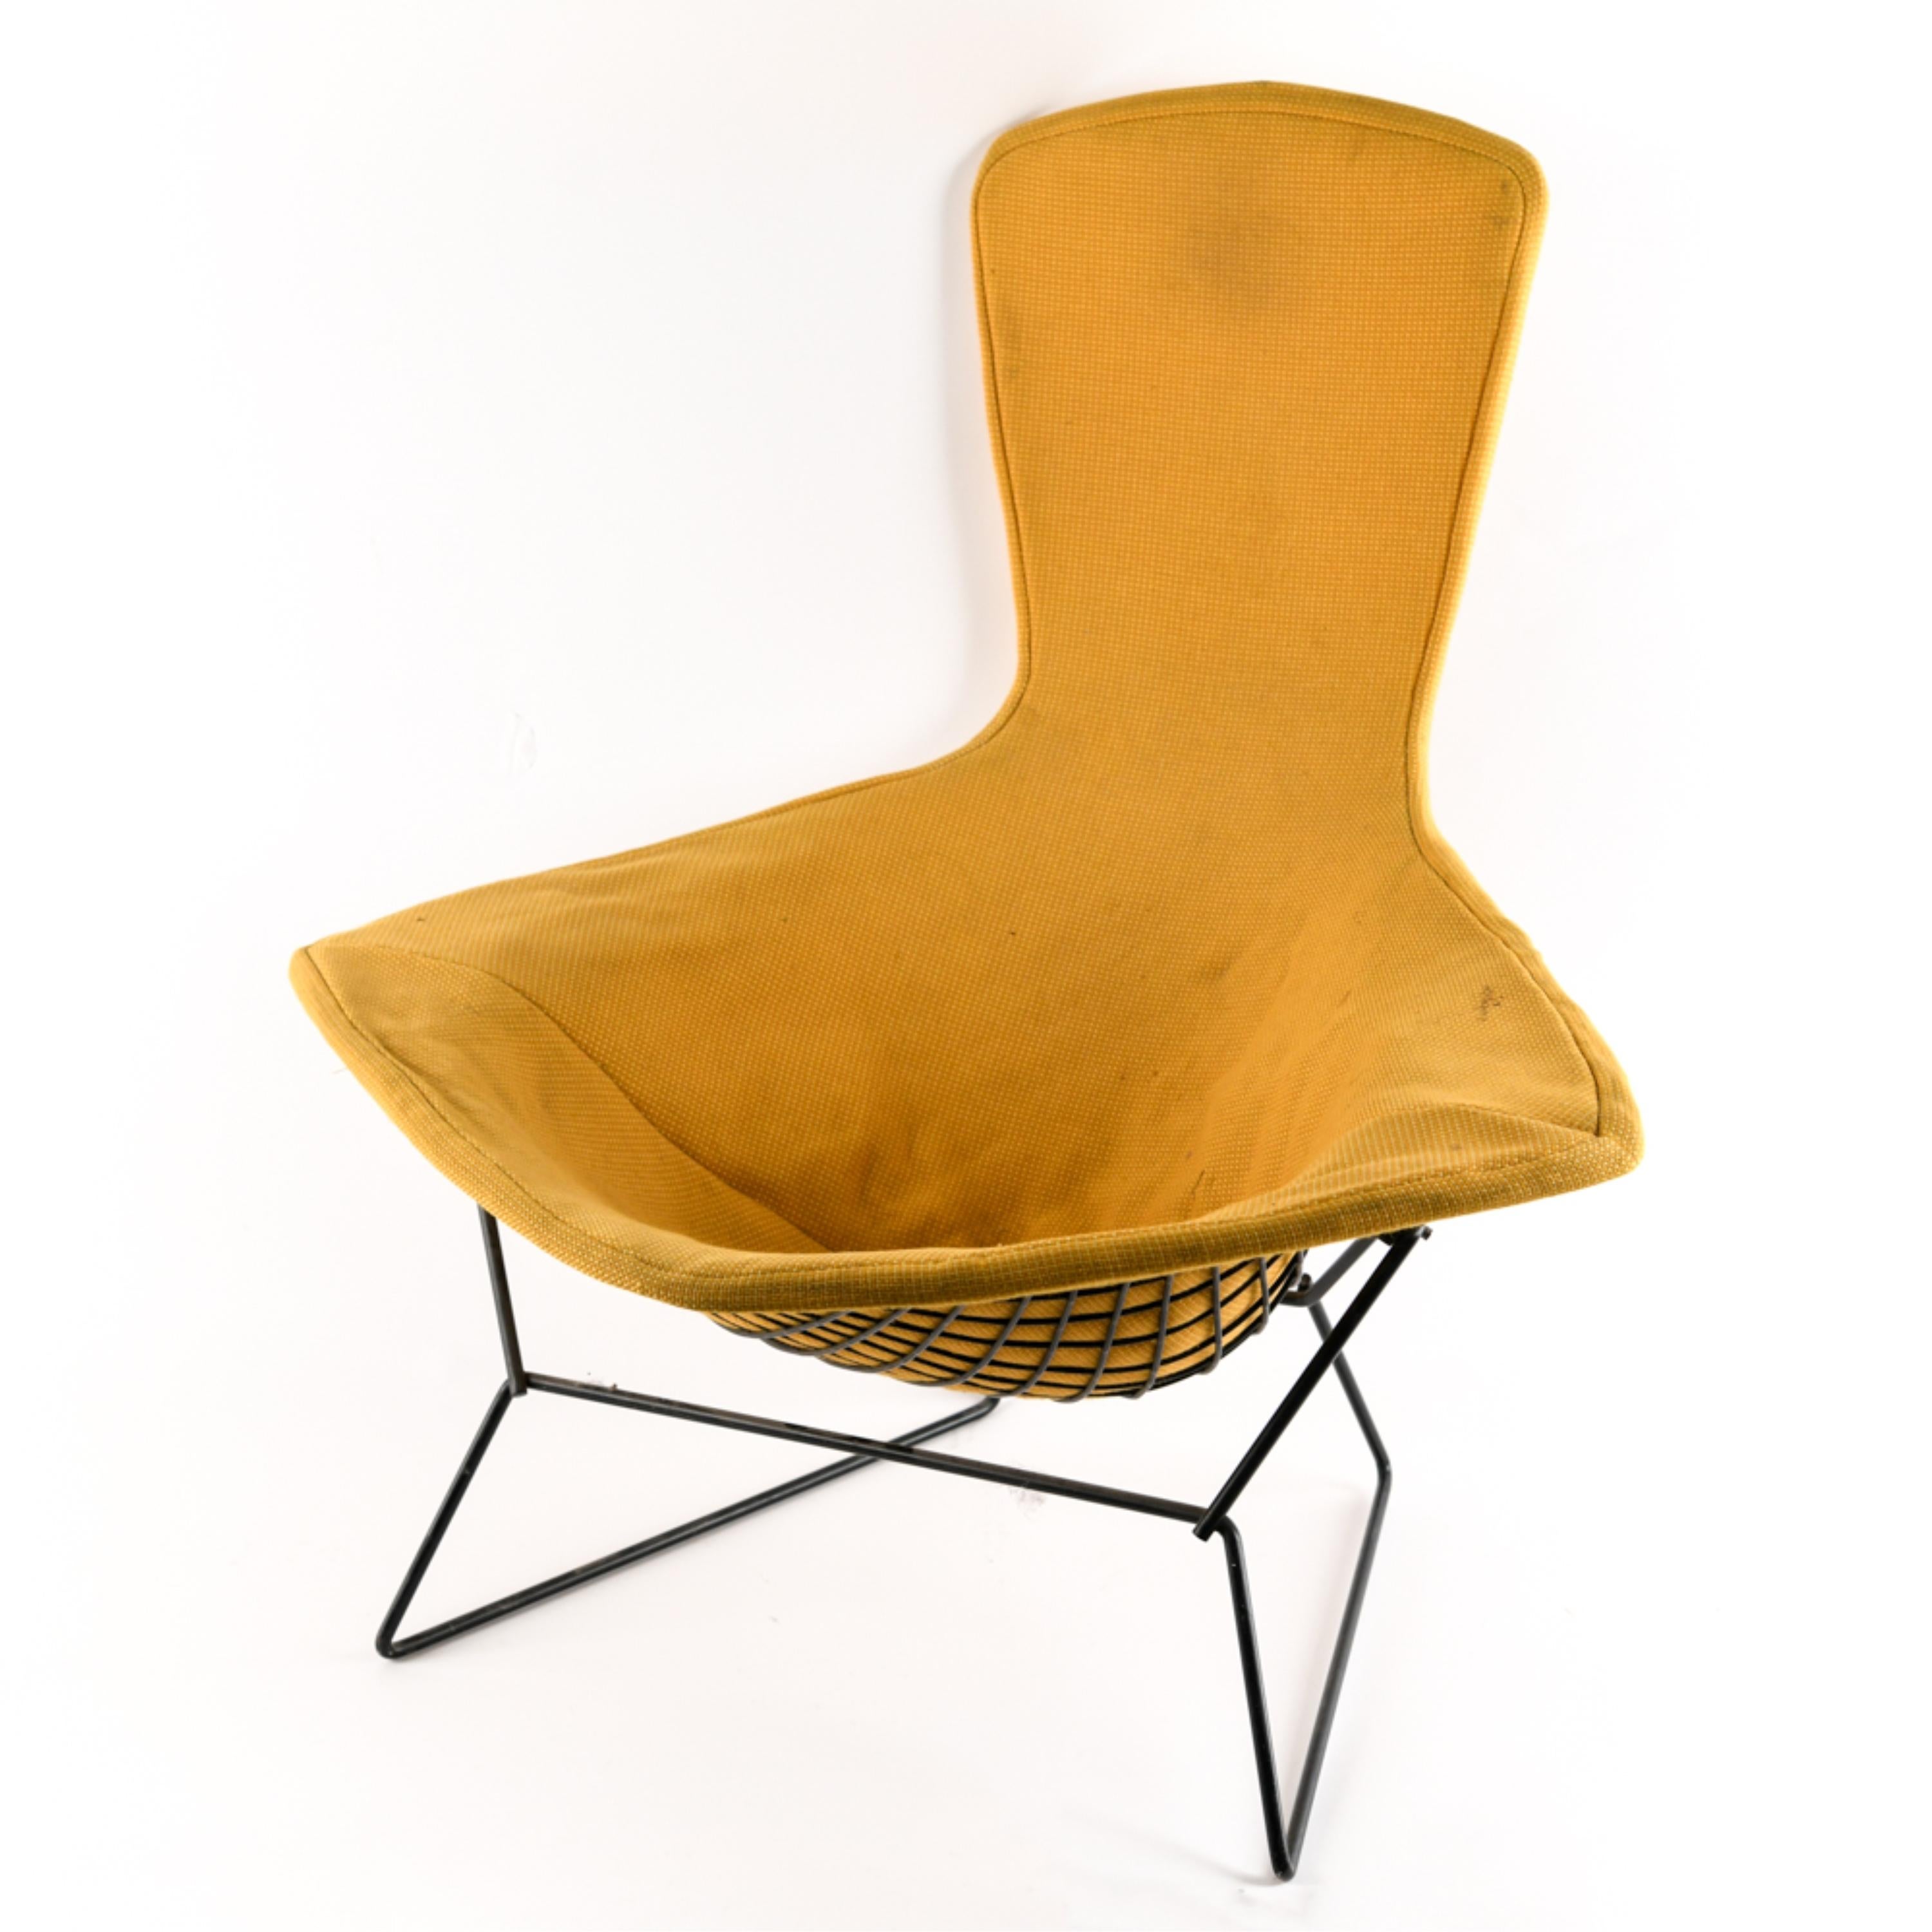 This is an example of an iconic design by Harry Bertoia for Knoll, circa 1950s. The 